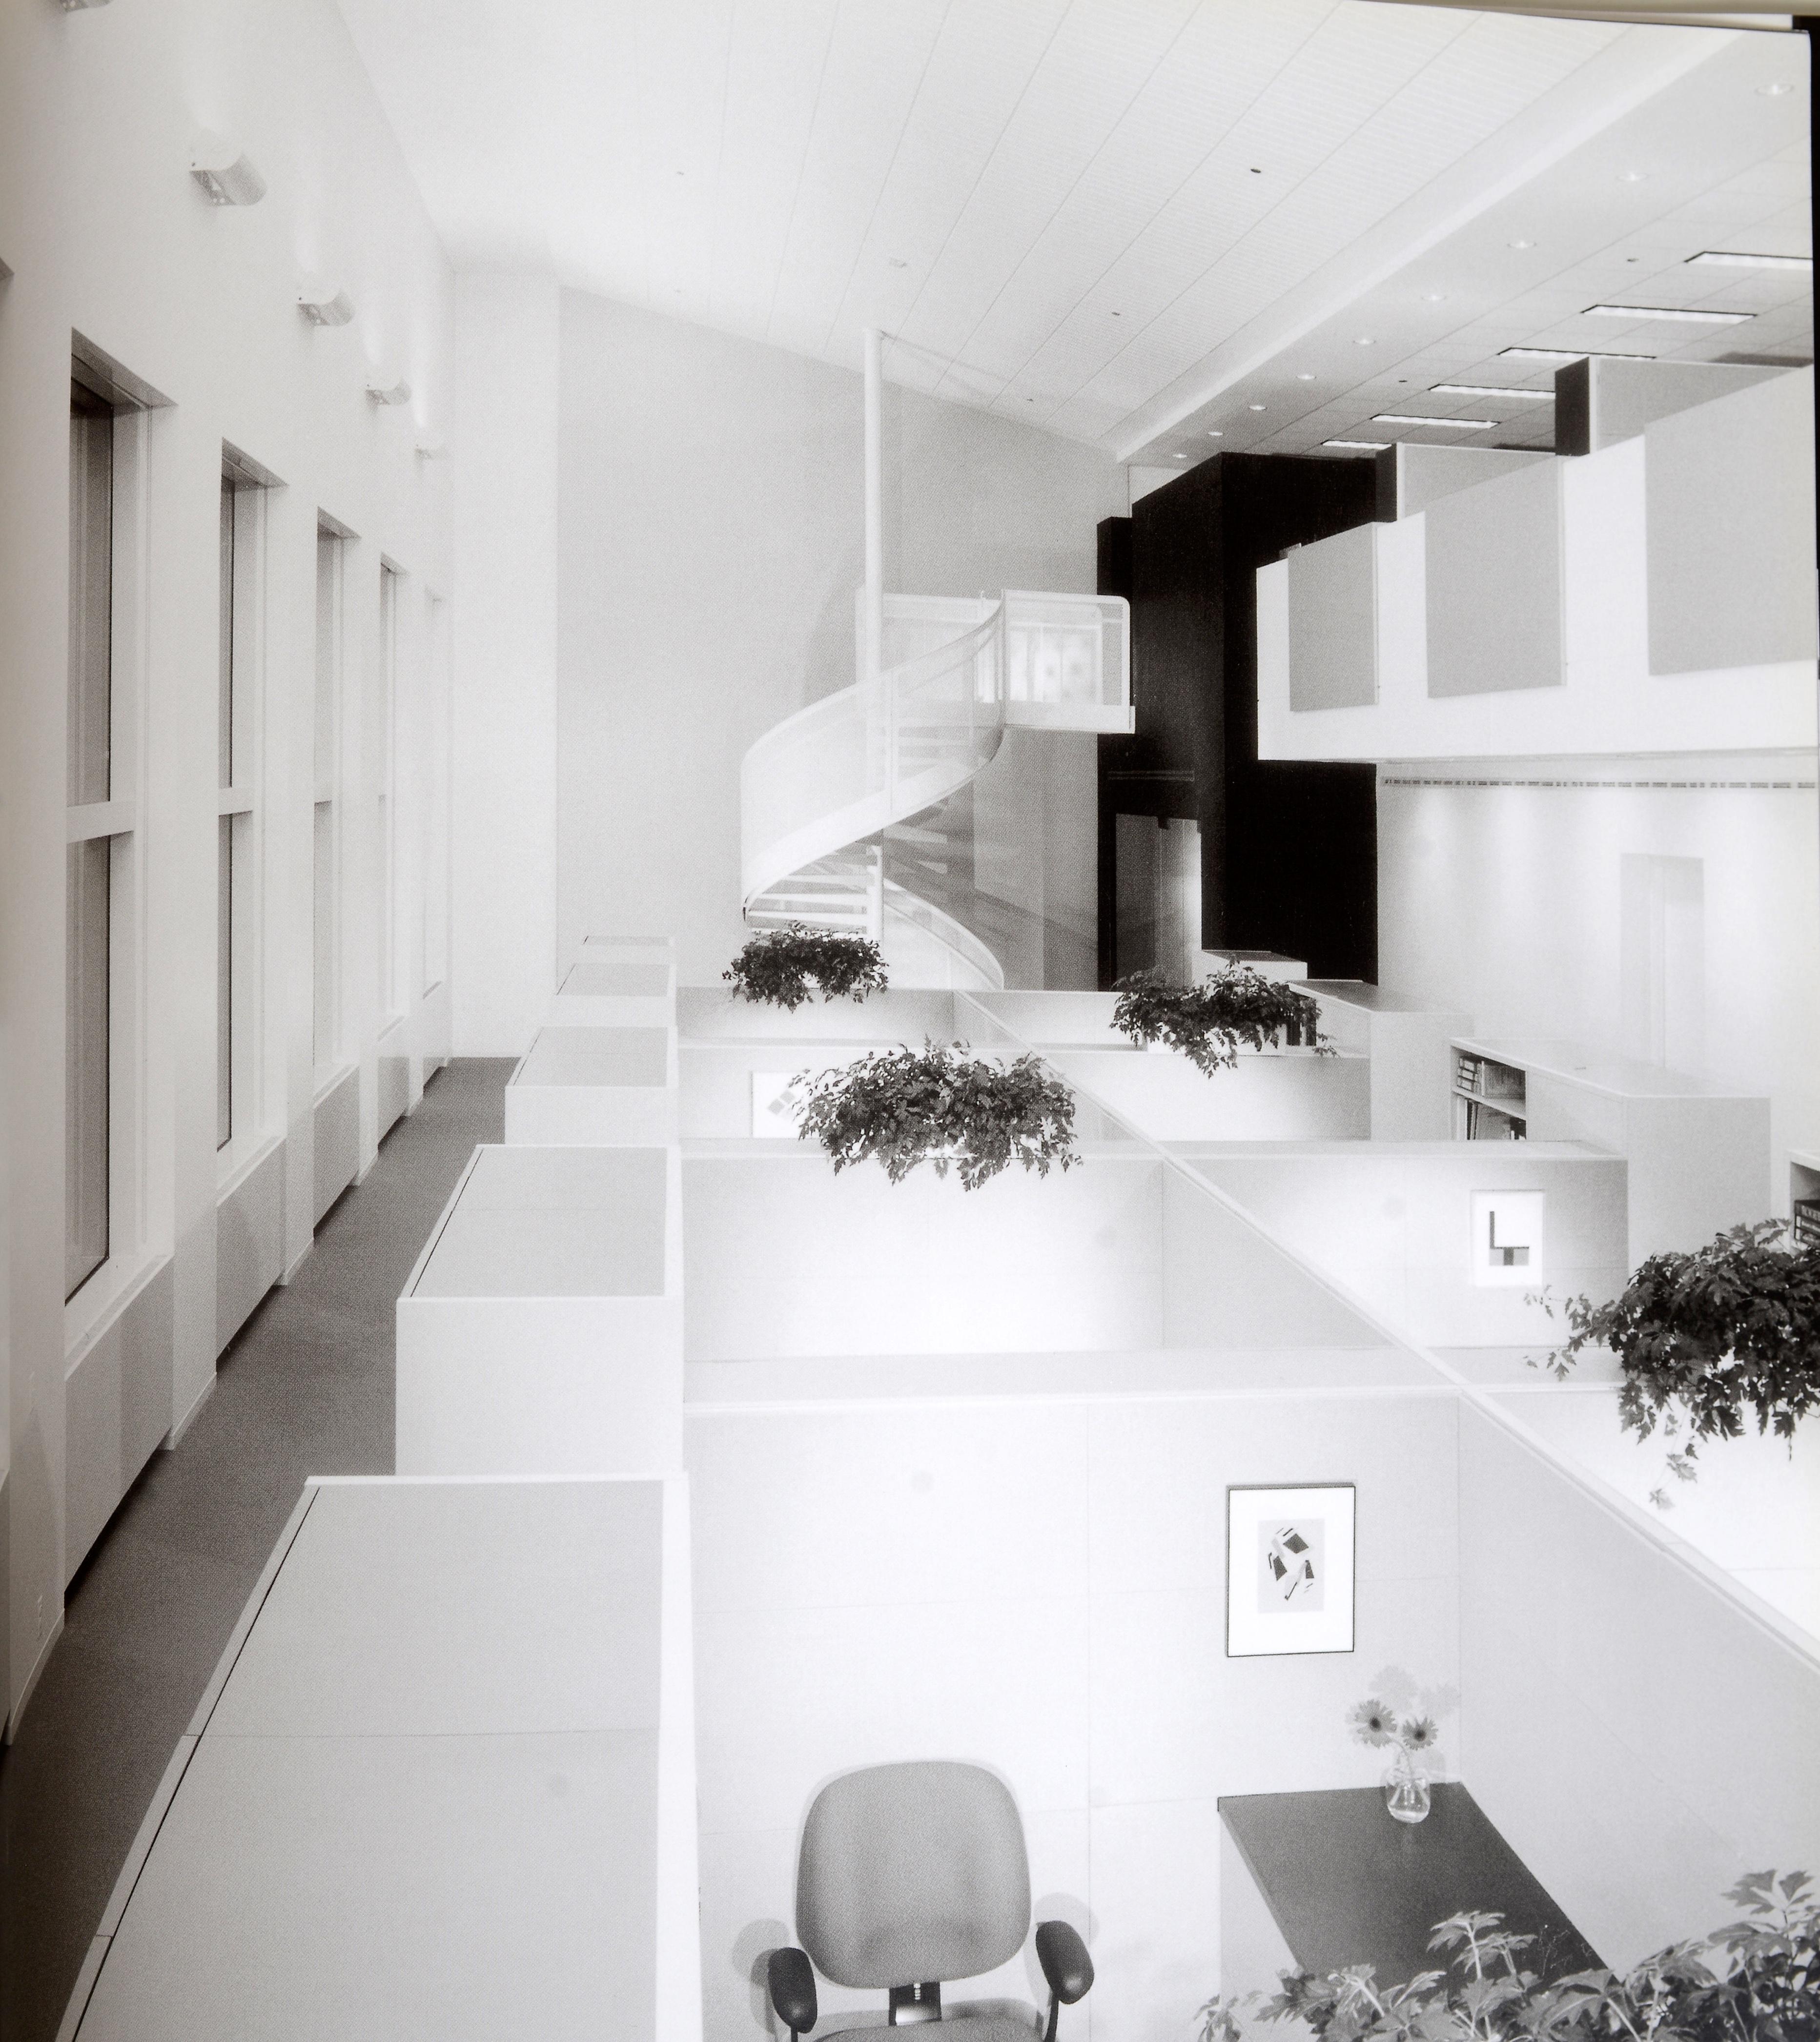 Powell/Kleinschmidt, Interior Architecture by Signed by the Architects 13